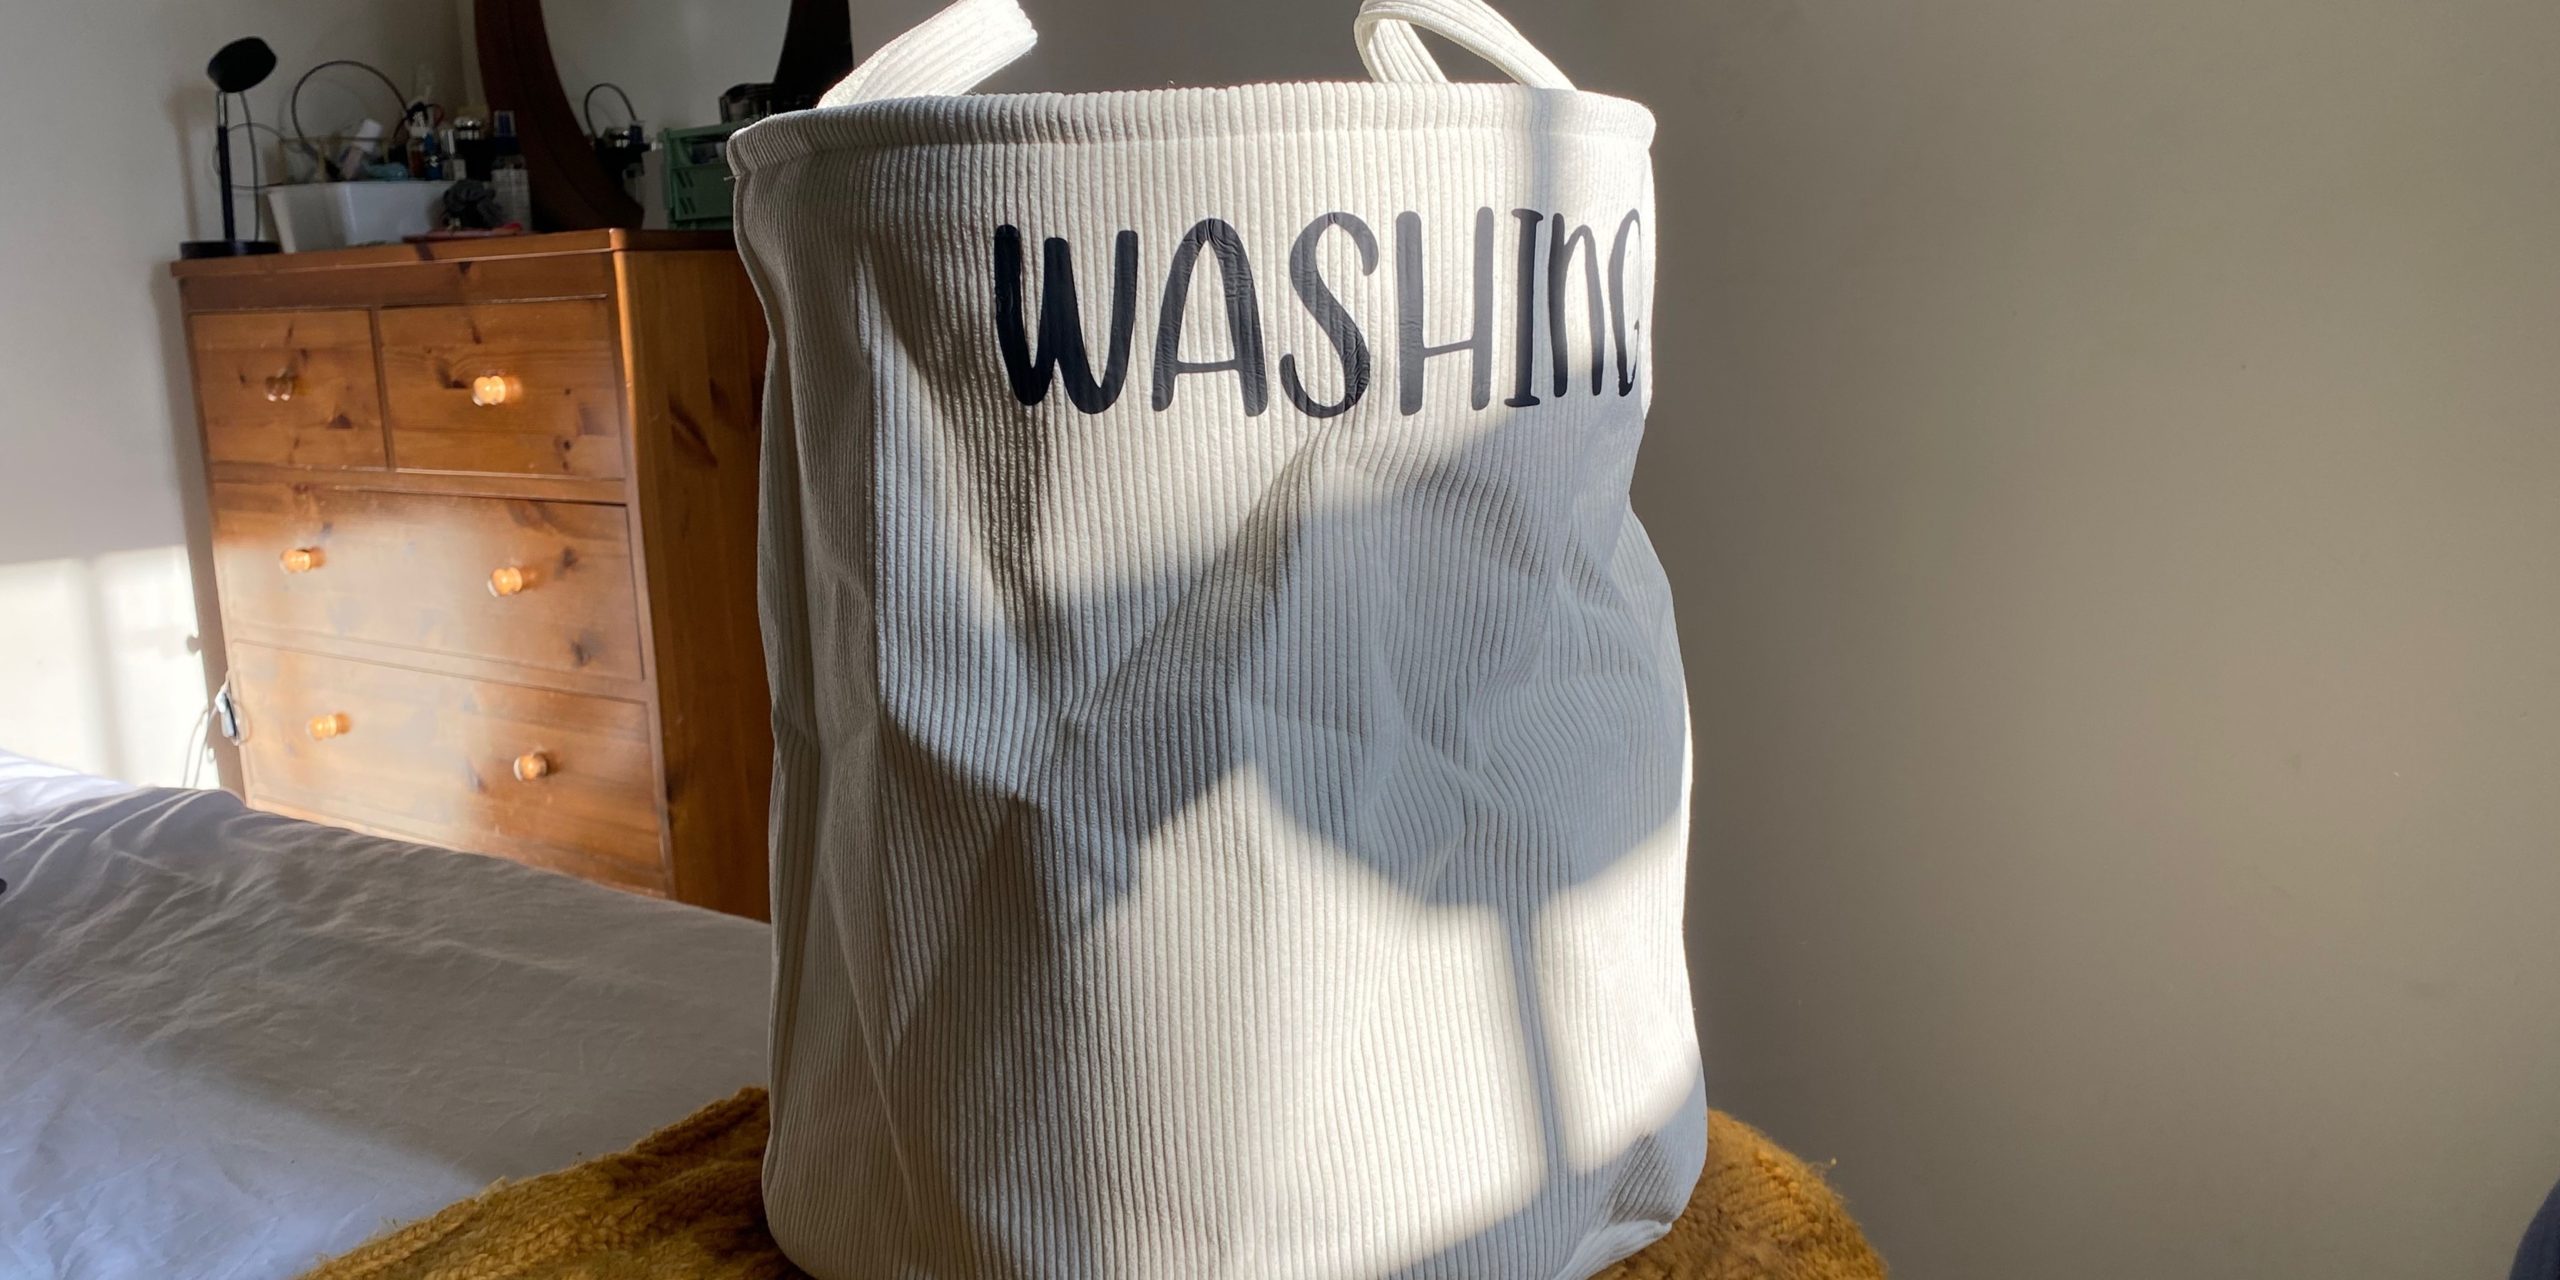 Cricut Primark Project Idea - label washing bag with iron-on